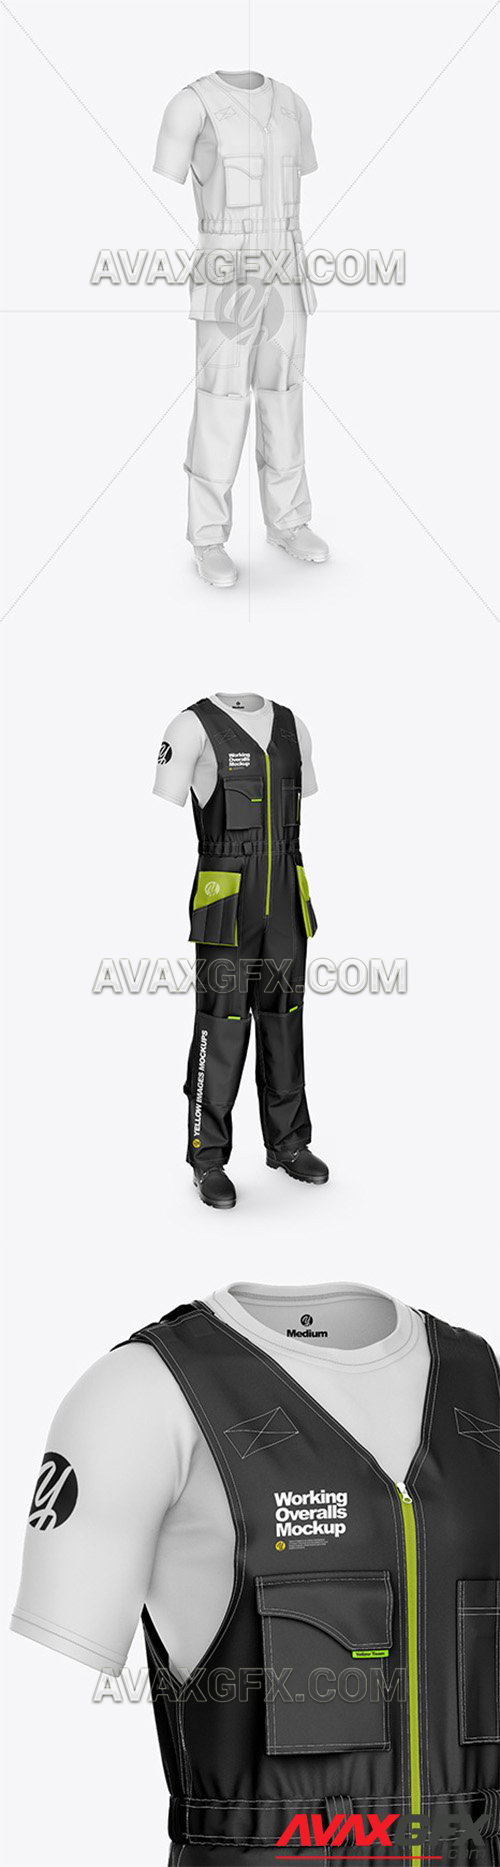 Working Summer Overalls Mockup – Front View 65539 » AVAXGFX - All